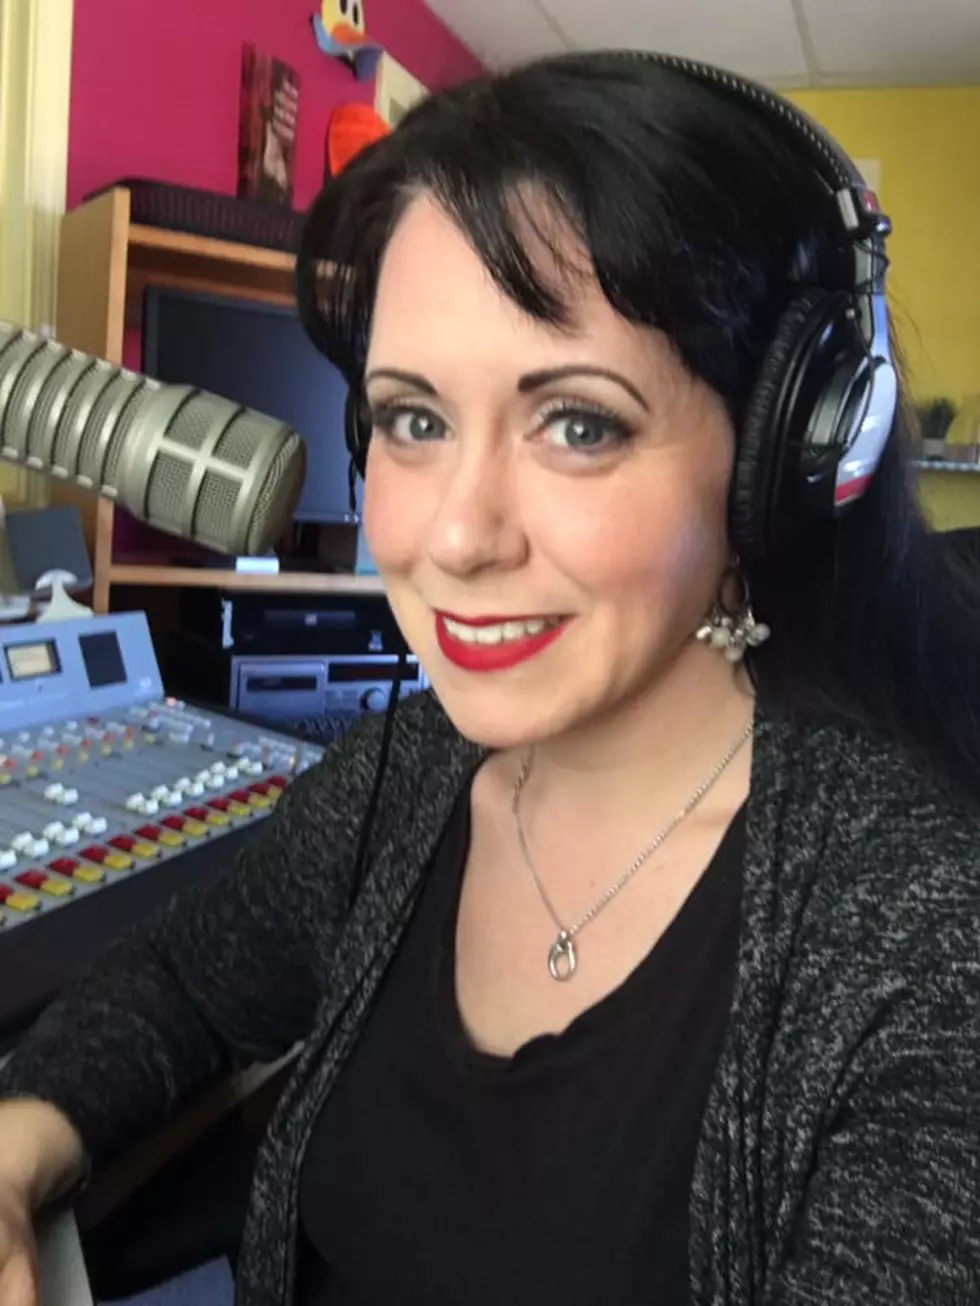 Looking Back: Cori Celebrates Her 4th Year Being Back On The Air In Bangor